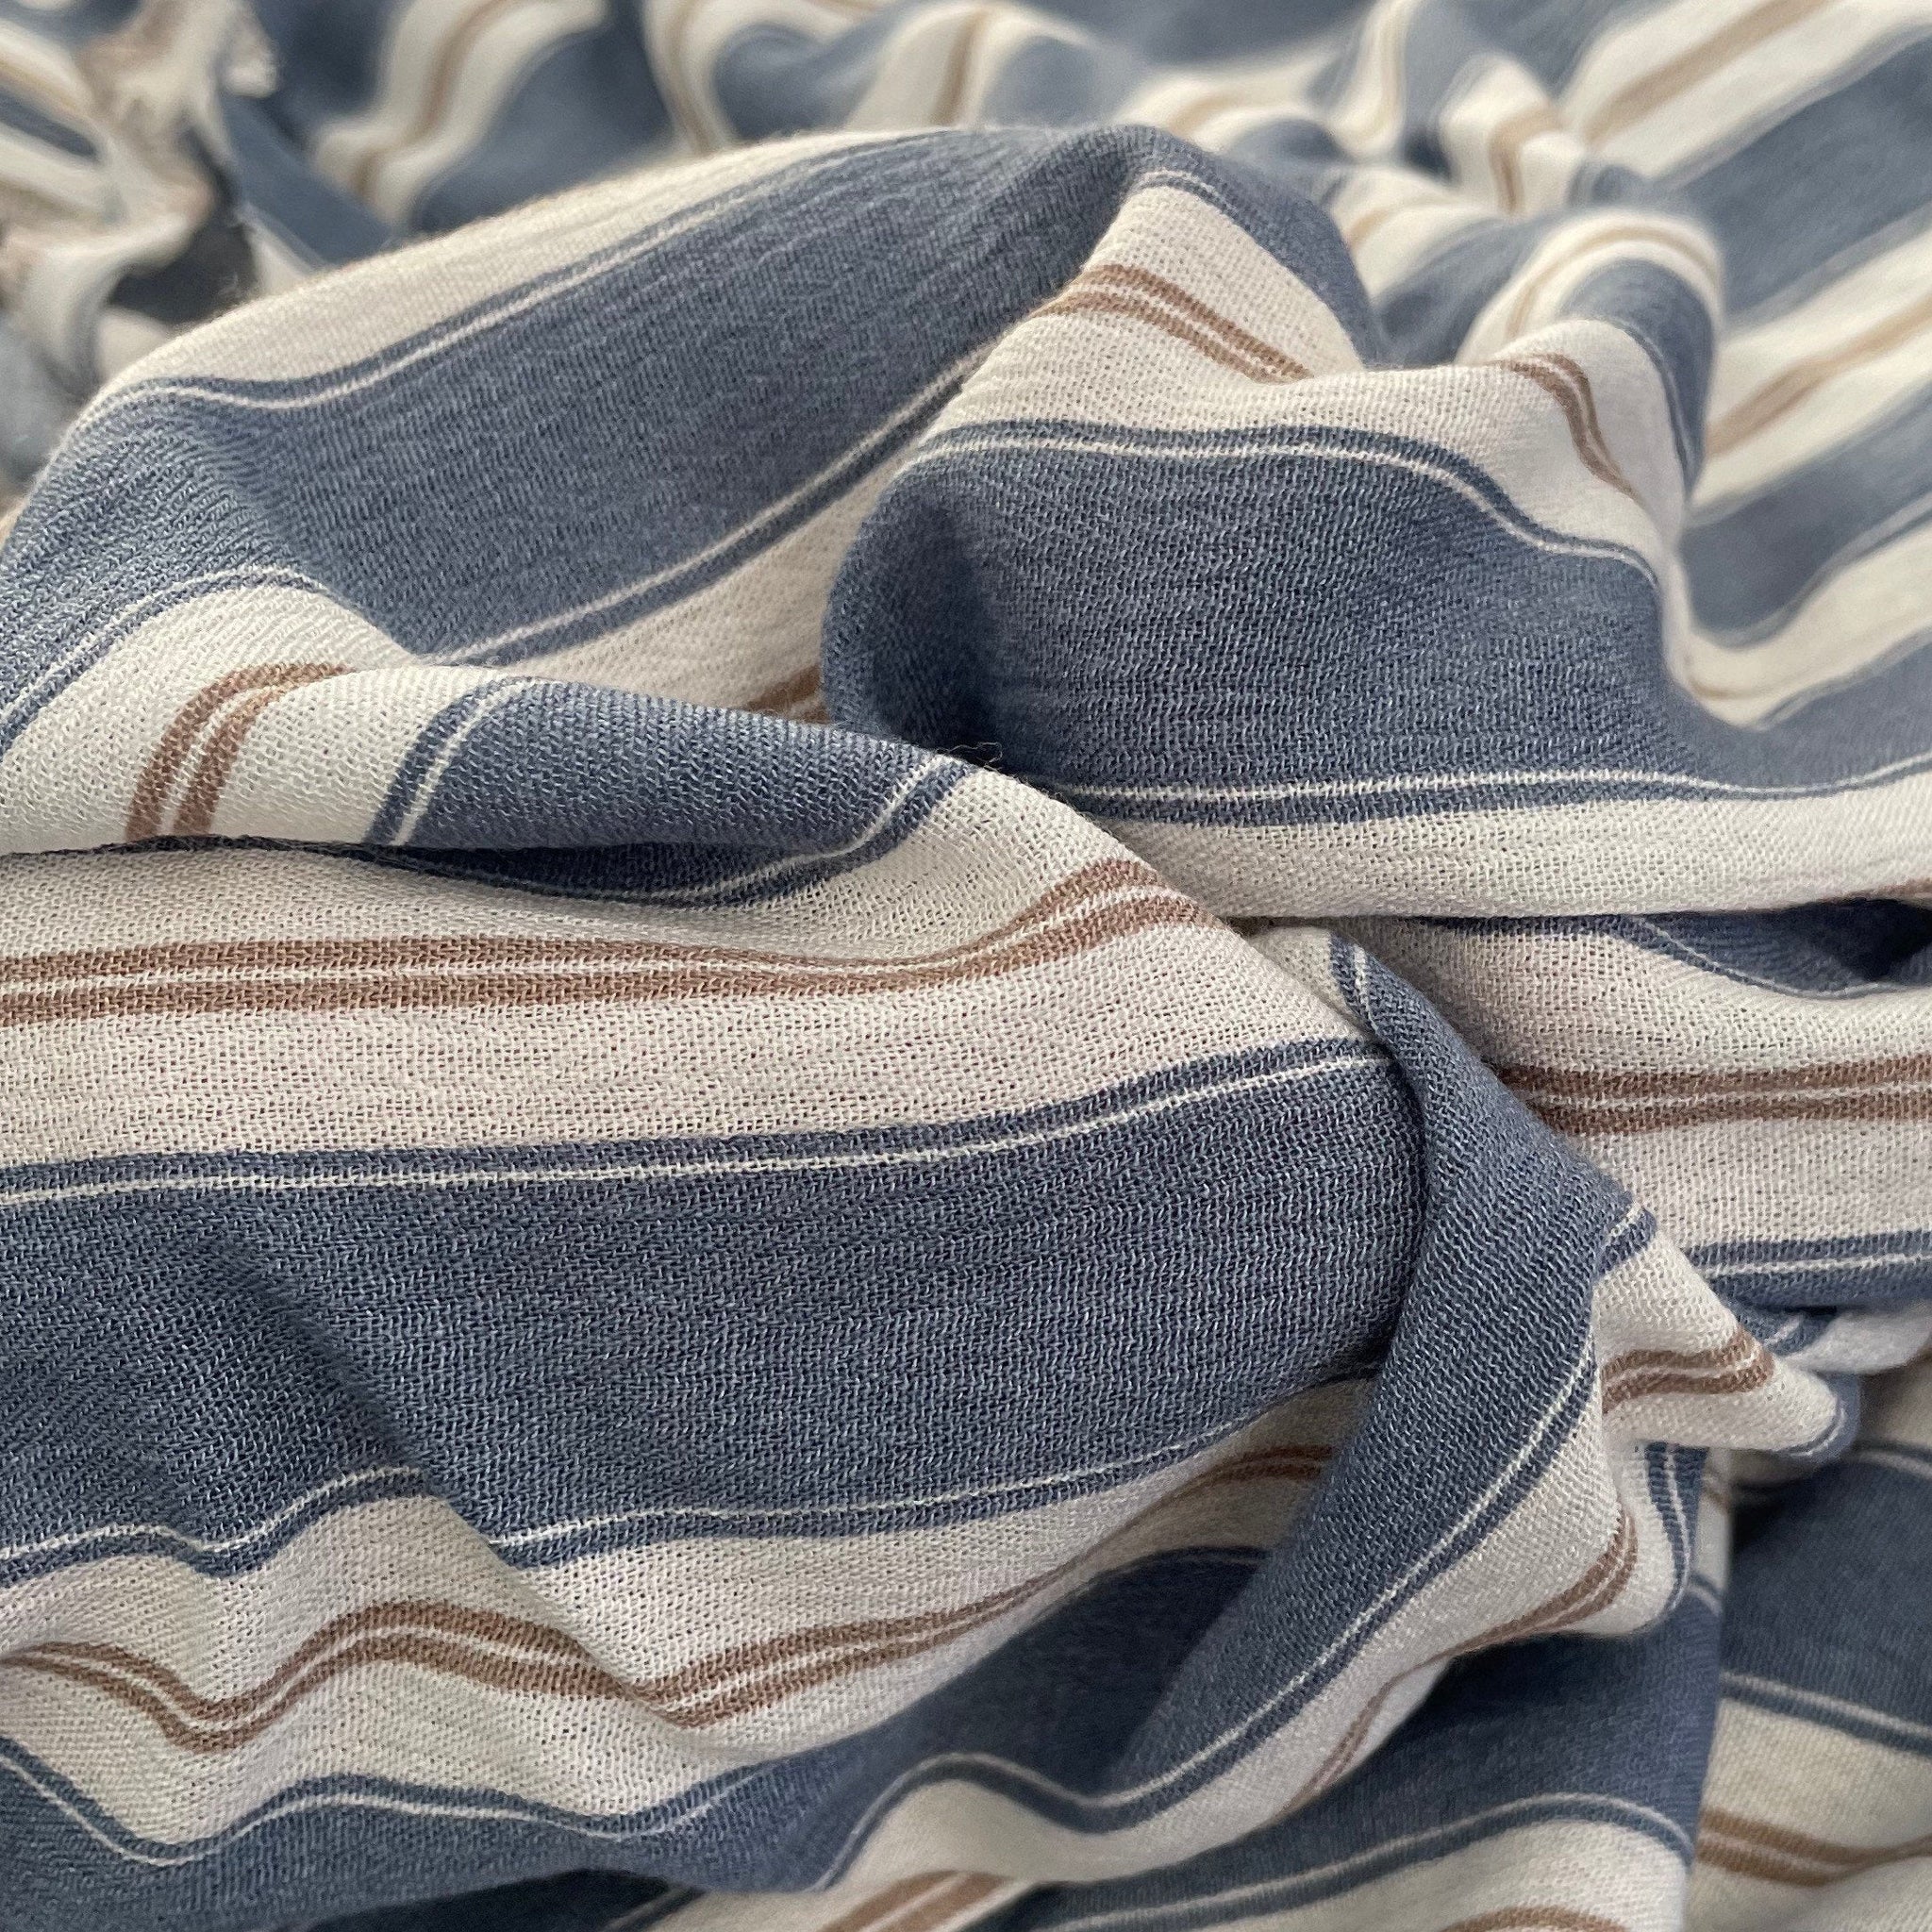 58 100% Cotton Pima Chambray Striped Blue Gold Light Apparel Woven Fabric  By the Yard